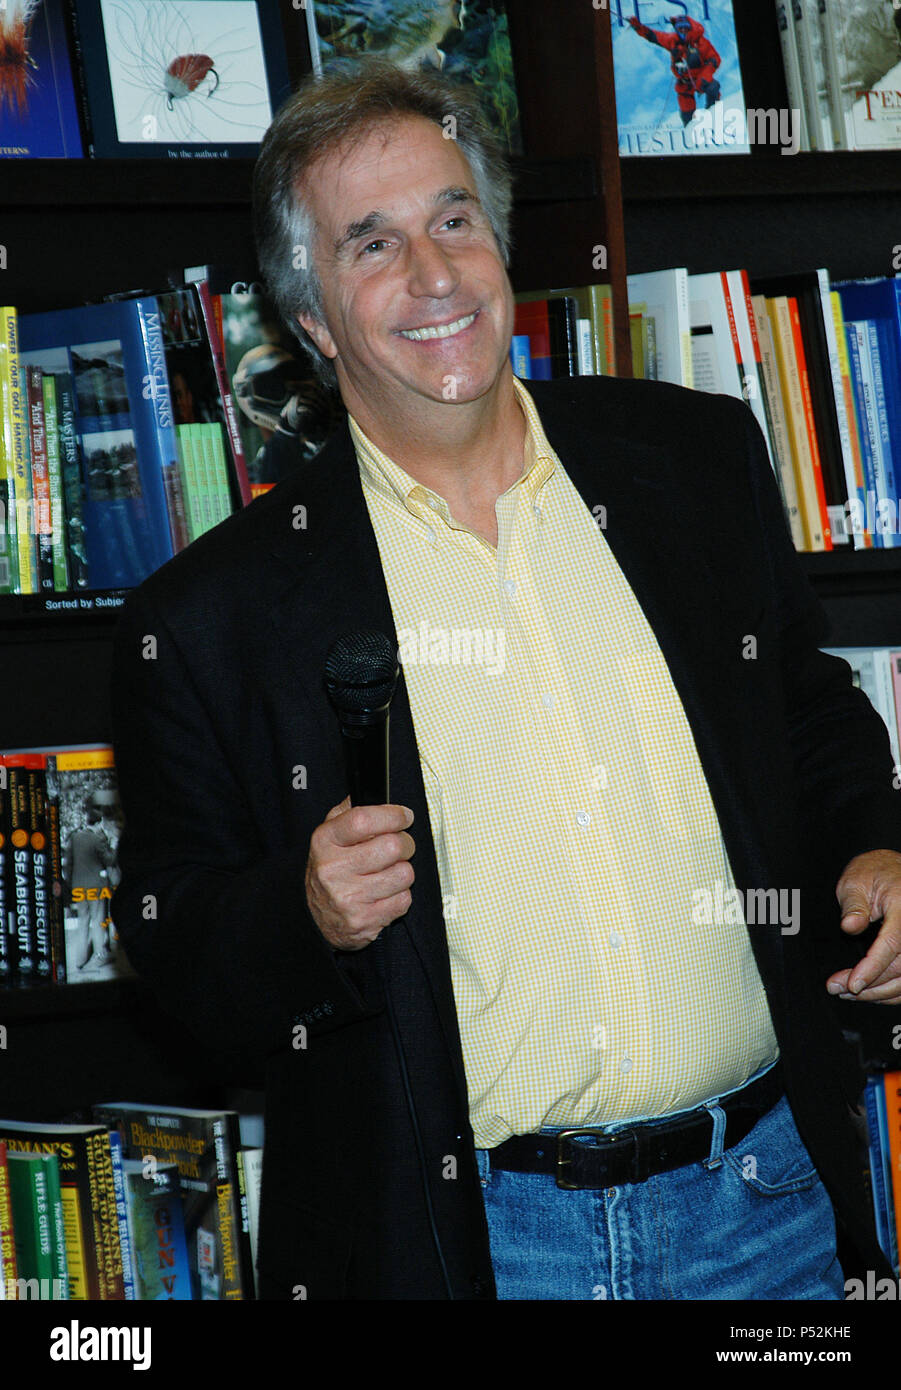 Bookstore appearance by actor/director and now author Henry Winkler for his two childrenÕs books in the new ÒHank ZipperÓ series for ages 8-12. Barnes & Noble at The Grove at Farmers Market in Los Angeles . August 9, 2003.WinklerHenry BookSigning14 Red Carpet Event, Vertical, USA, Film Industry, Celebrities,  Photography, Bestof, Arts Culture and Entertainment, Topix Celebrities fashion /  Vertical, Best of, Event in Hollywood Life - California,  Red Carpet and backstage, USA, Film Industry, Celebrities,  movie celebrities, TV celebrities, Music celebrities, Photography, Bestof, Arts Culture a Stock Photo